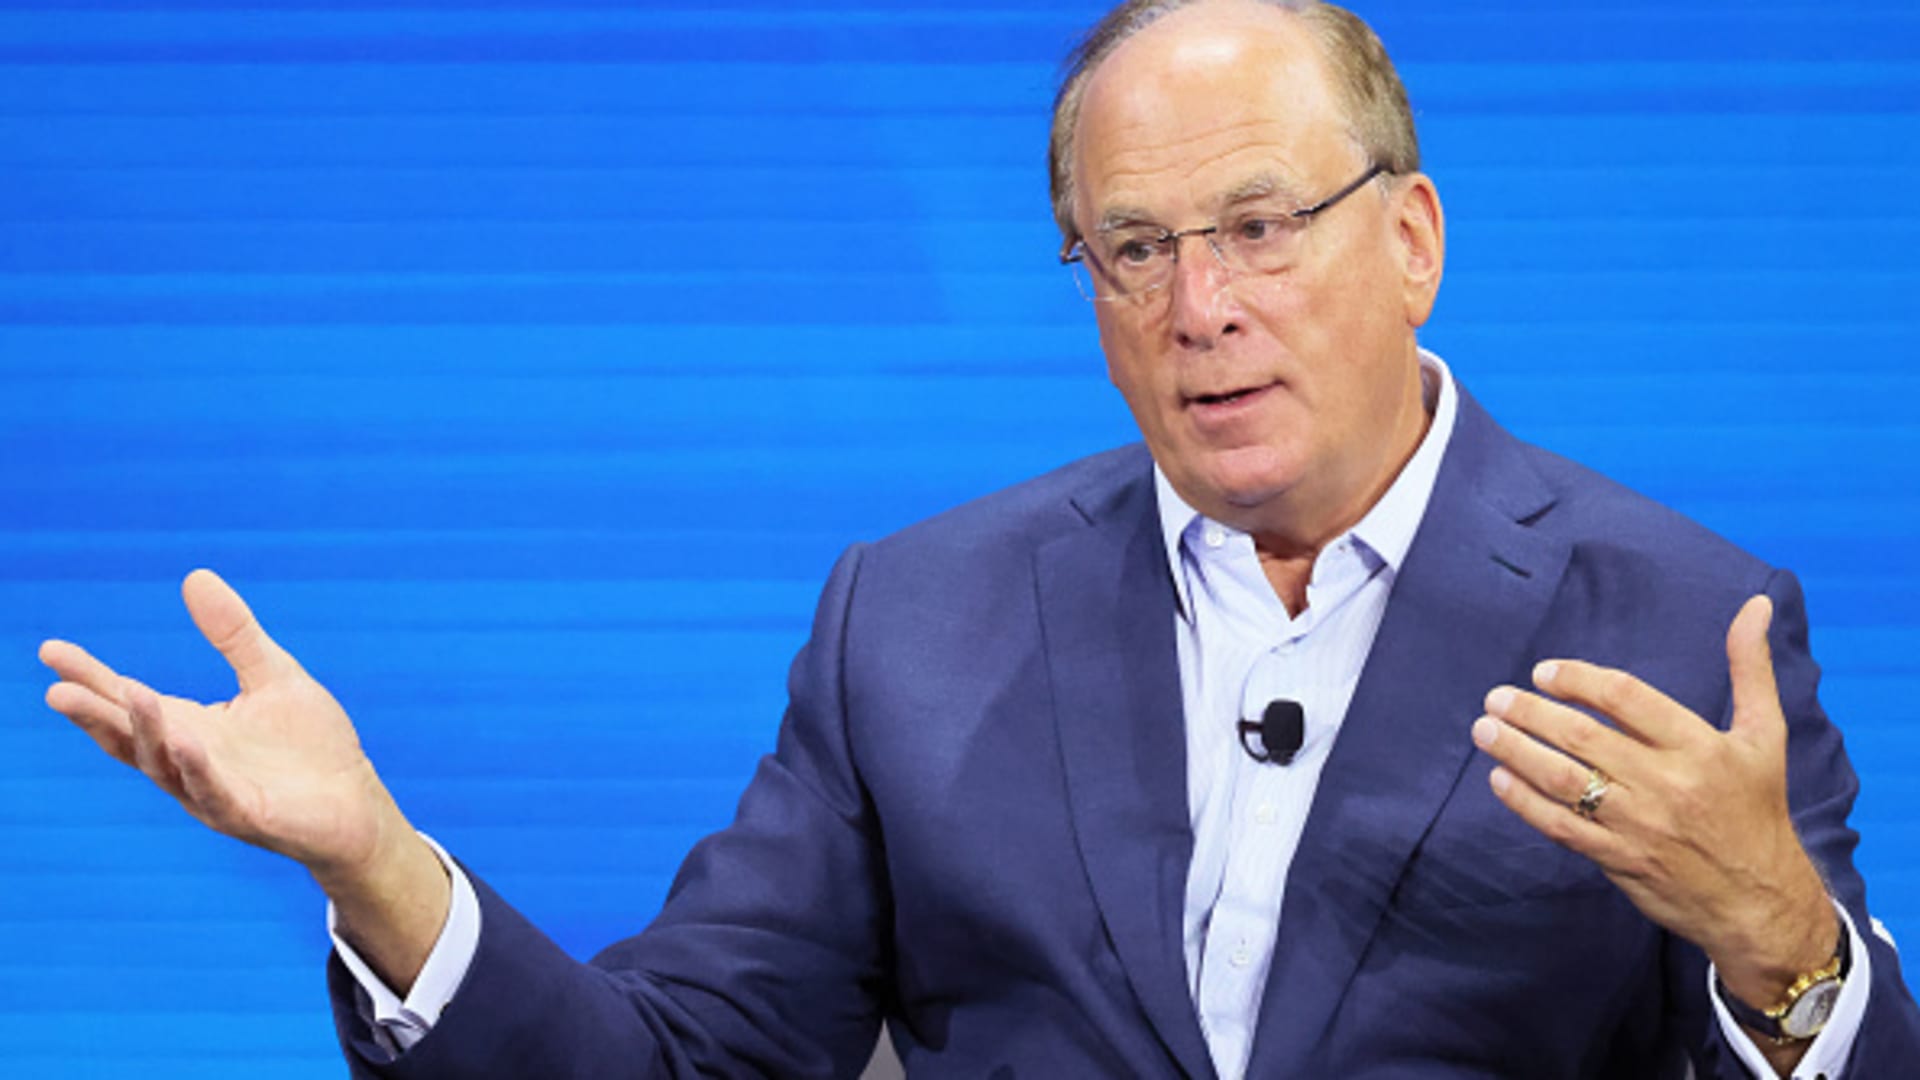 BlackRock CEO Larry Fink says 65 retirement age is too low. Here's what experts say - CNBC